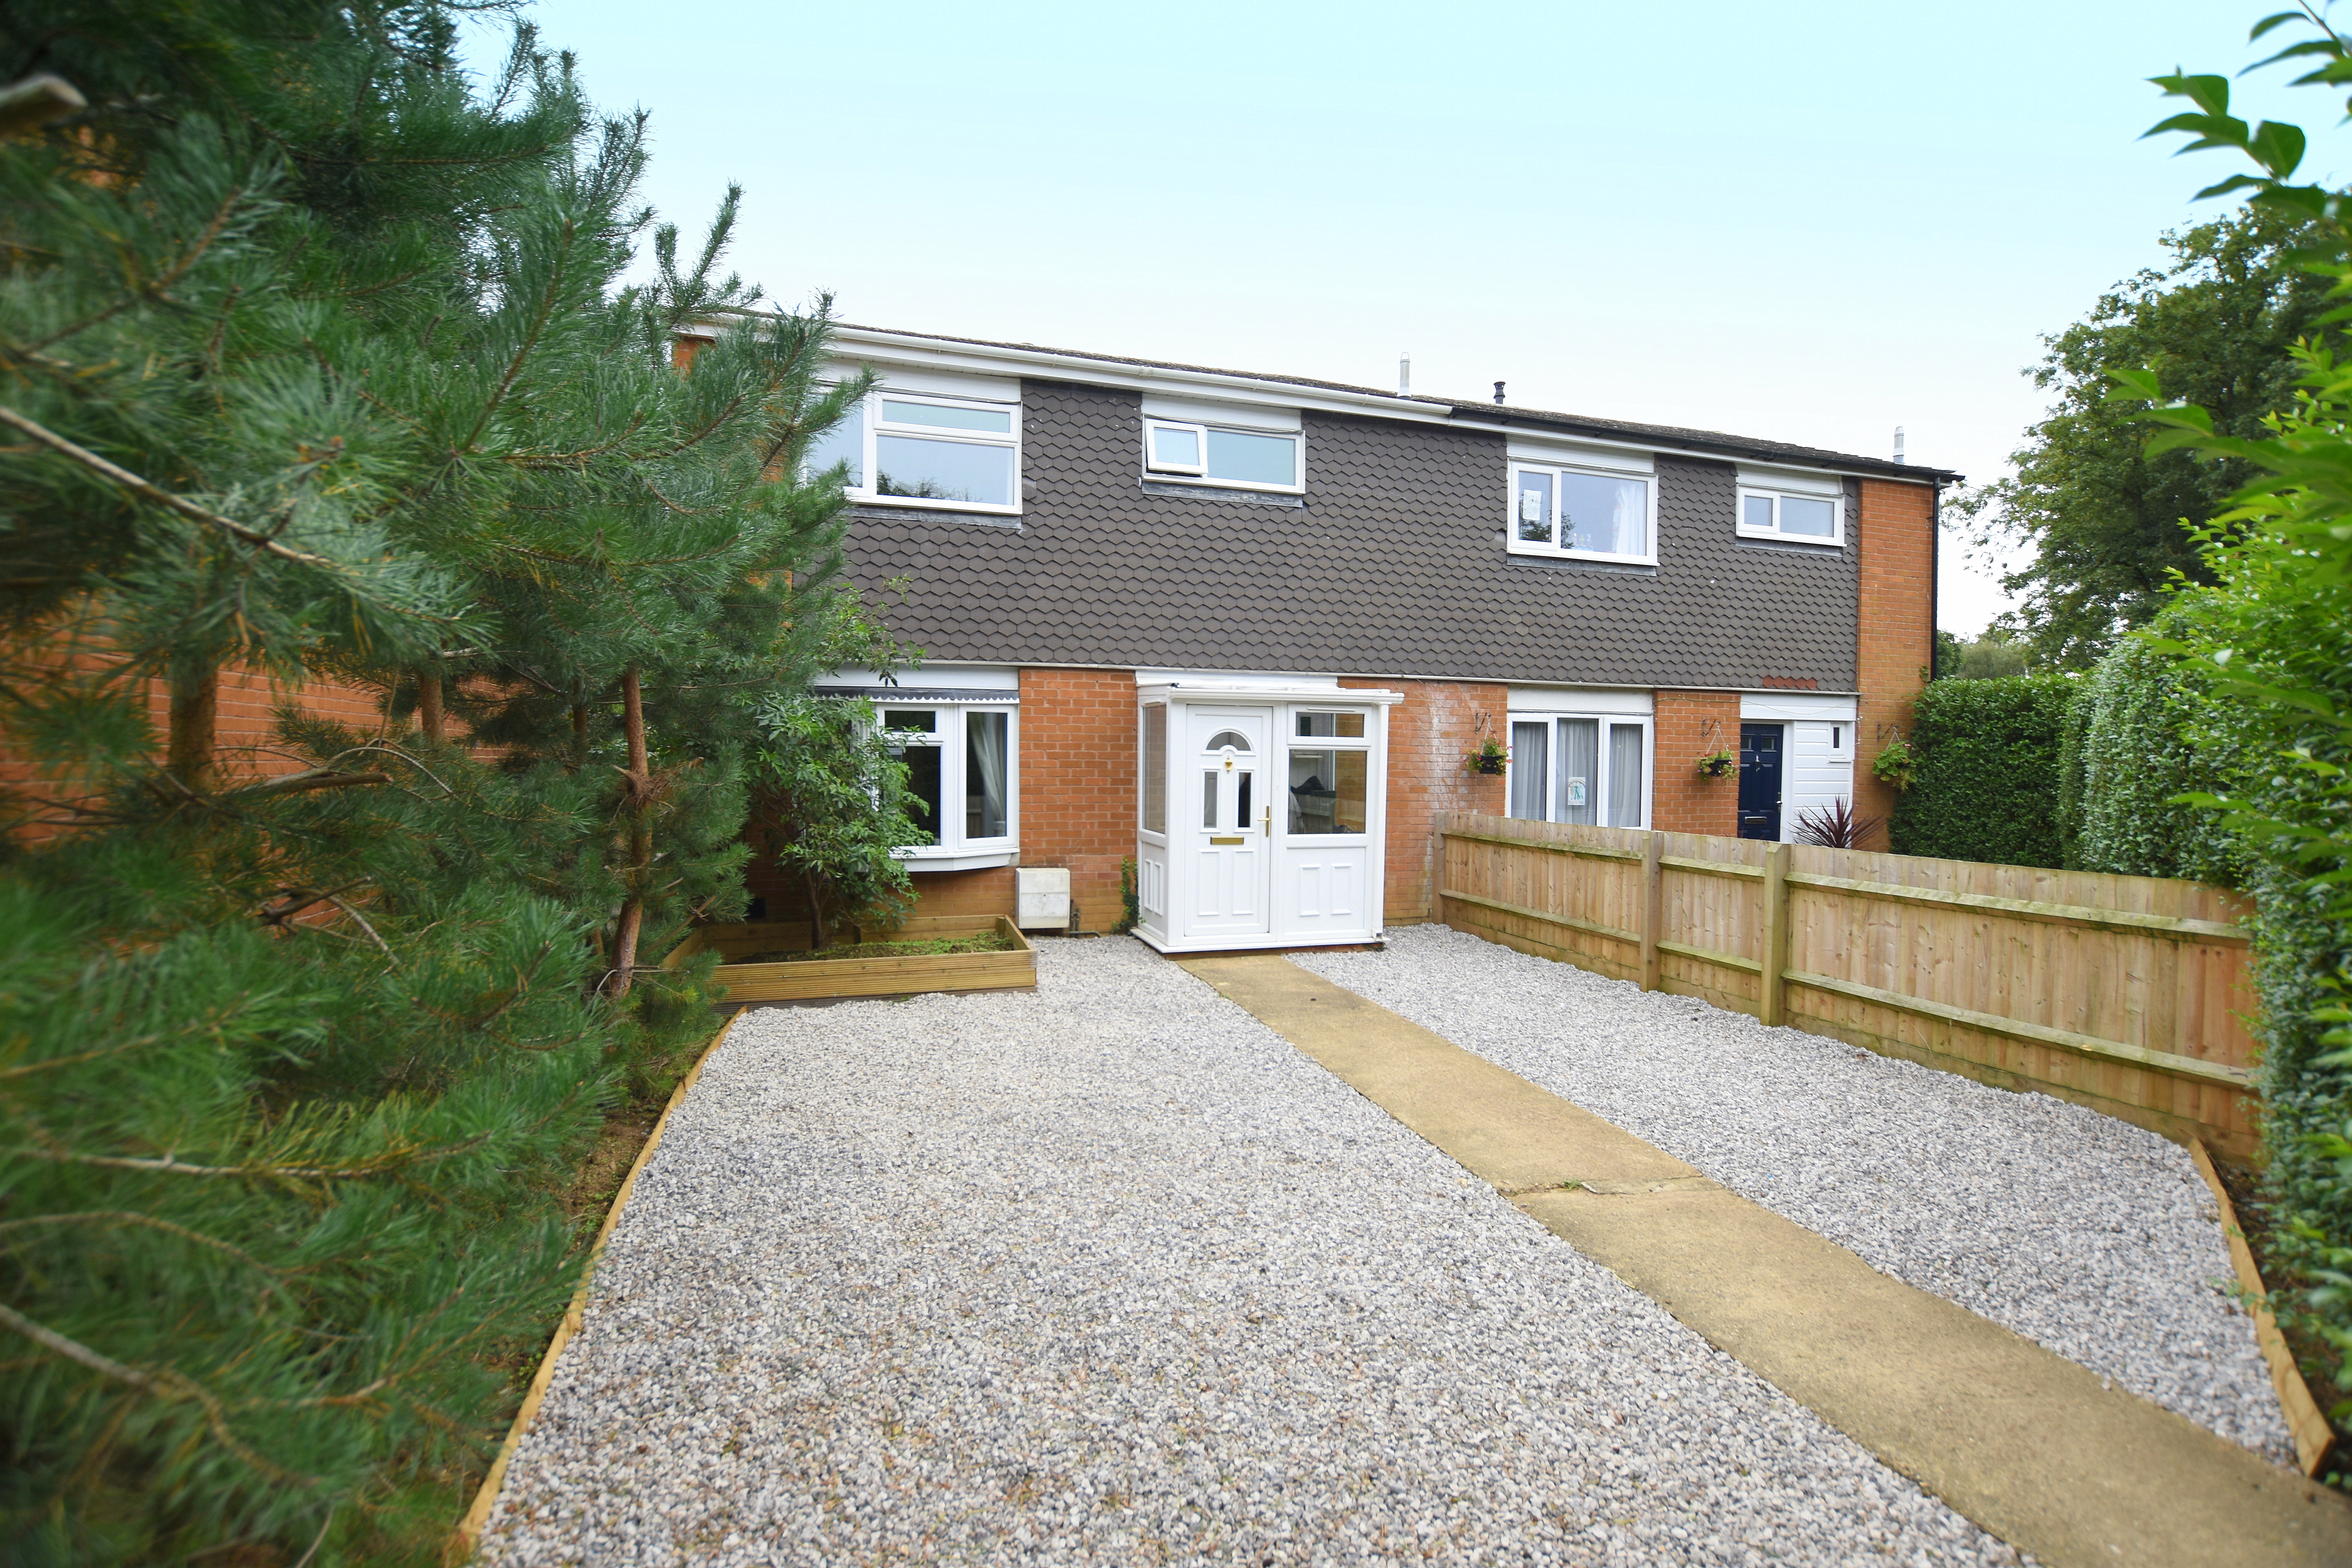 3 bed  for sale in Portway, Banbury 0